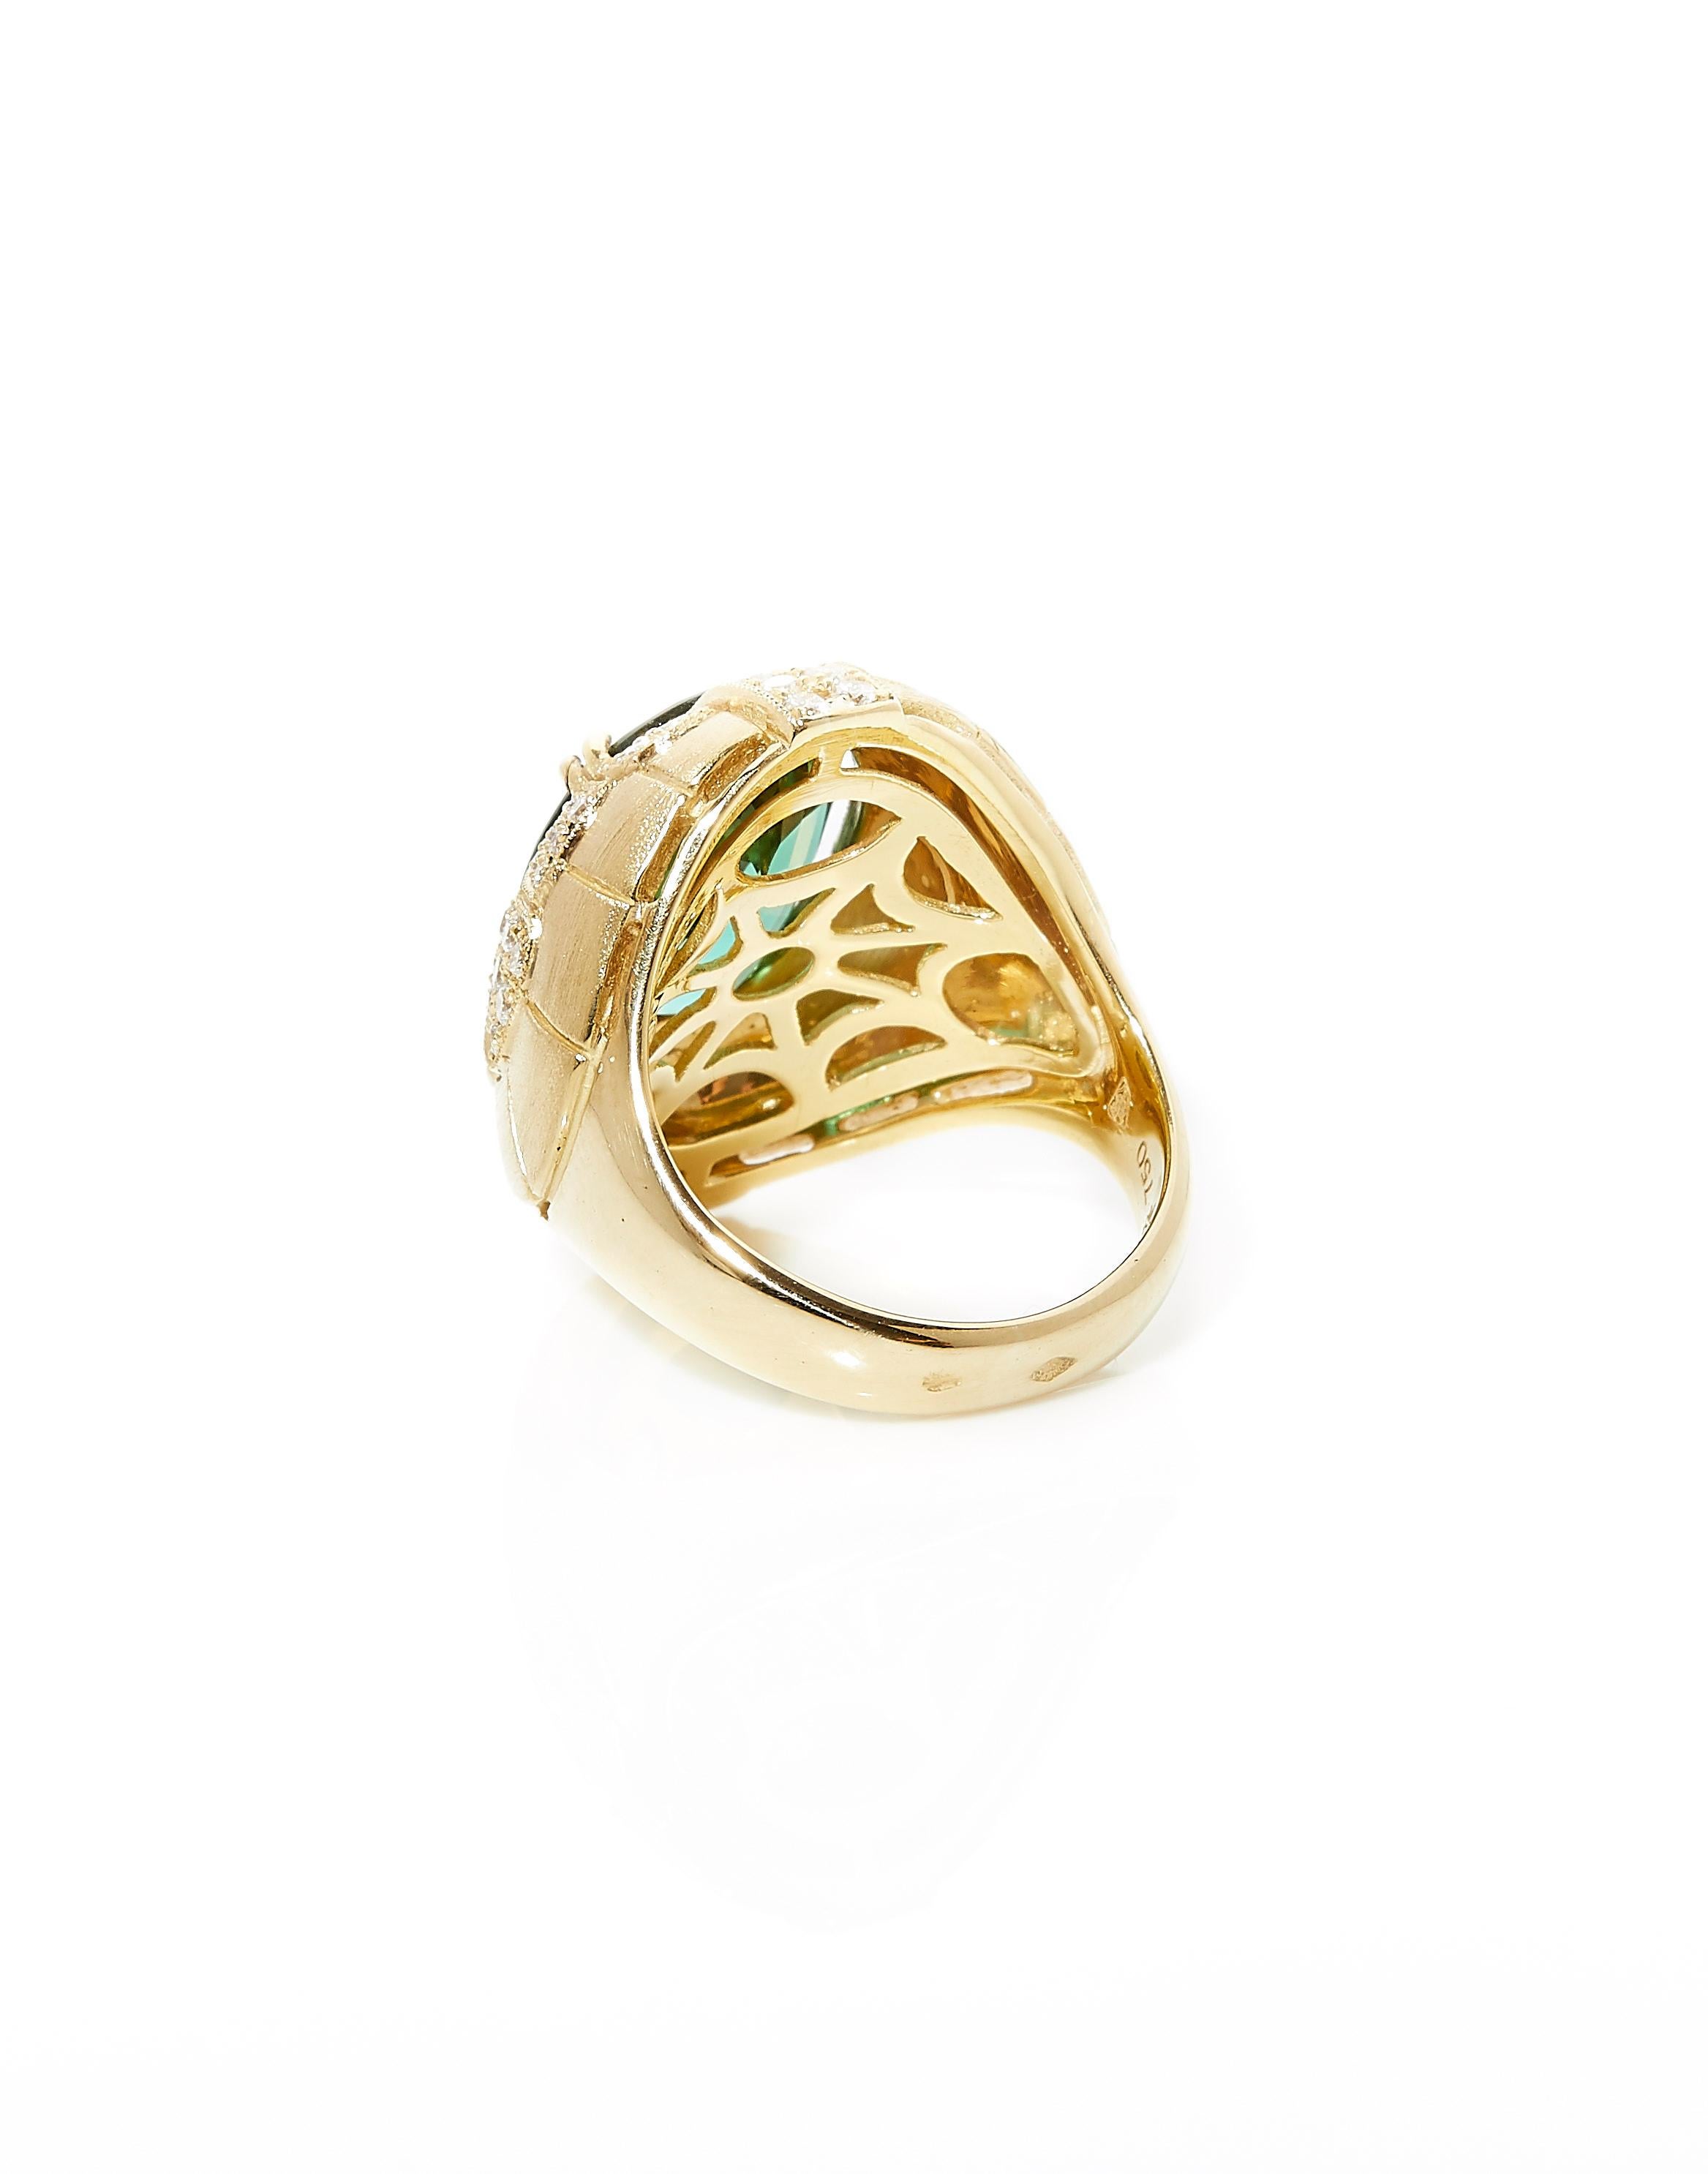 Contemporary 18 Karat Yellow Gold Cocktail Ring With Tourmaline & Diamonds, On Made to Order For Sale